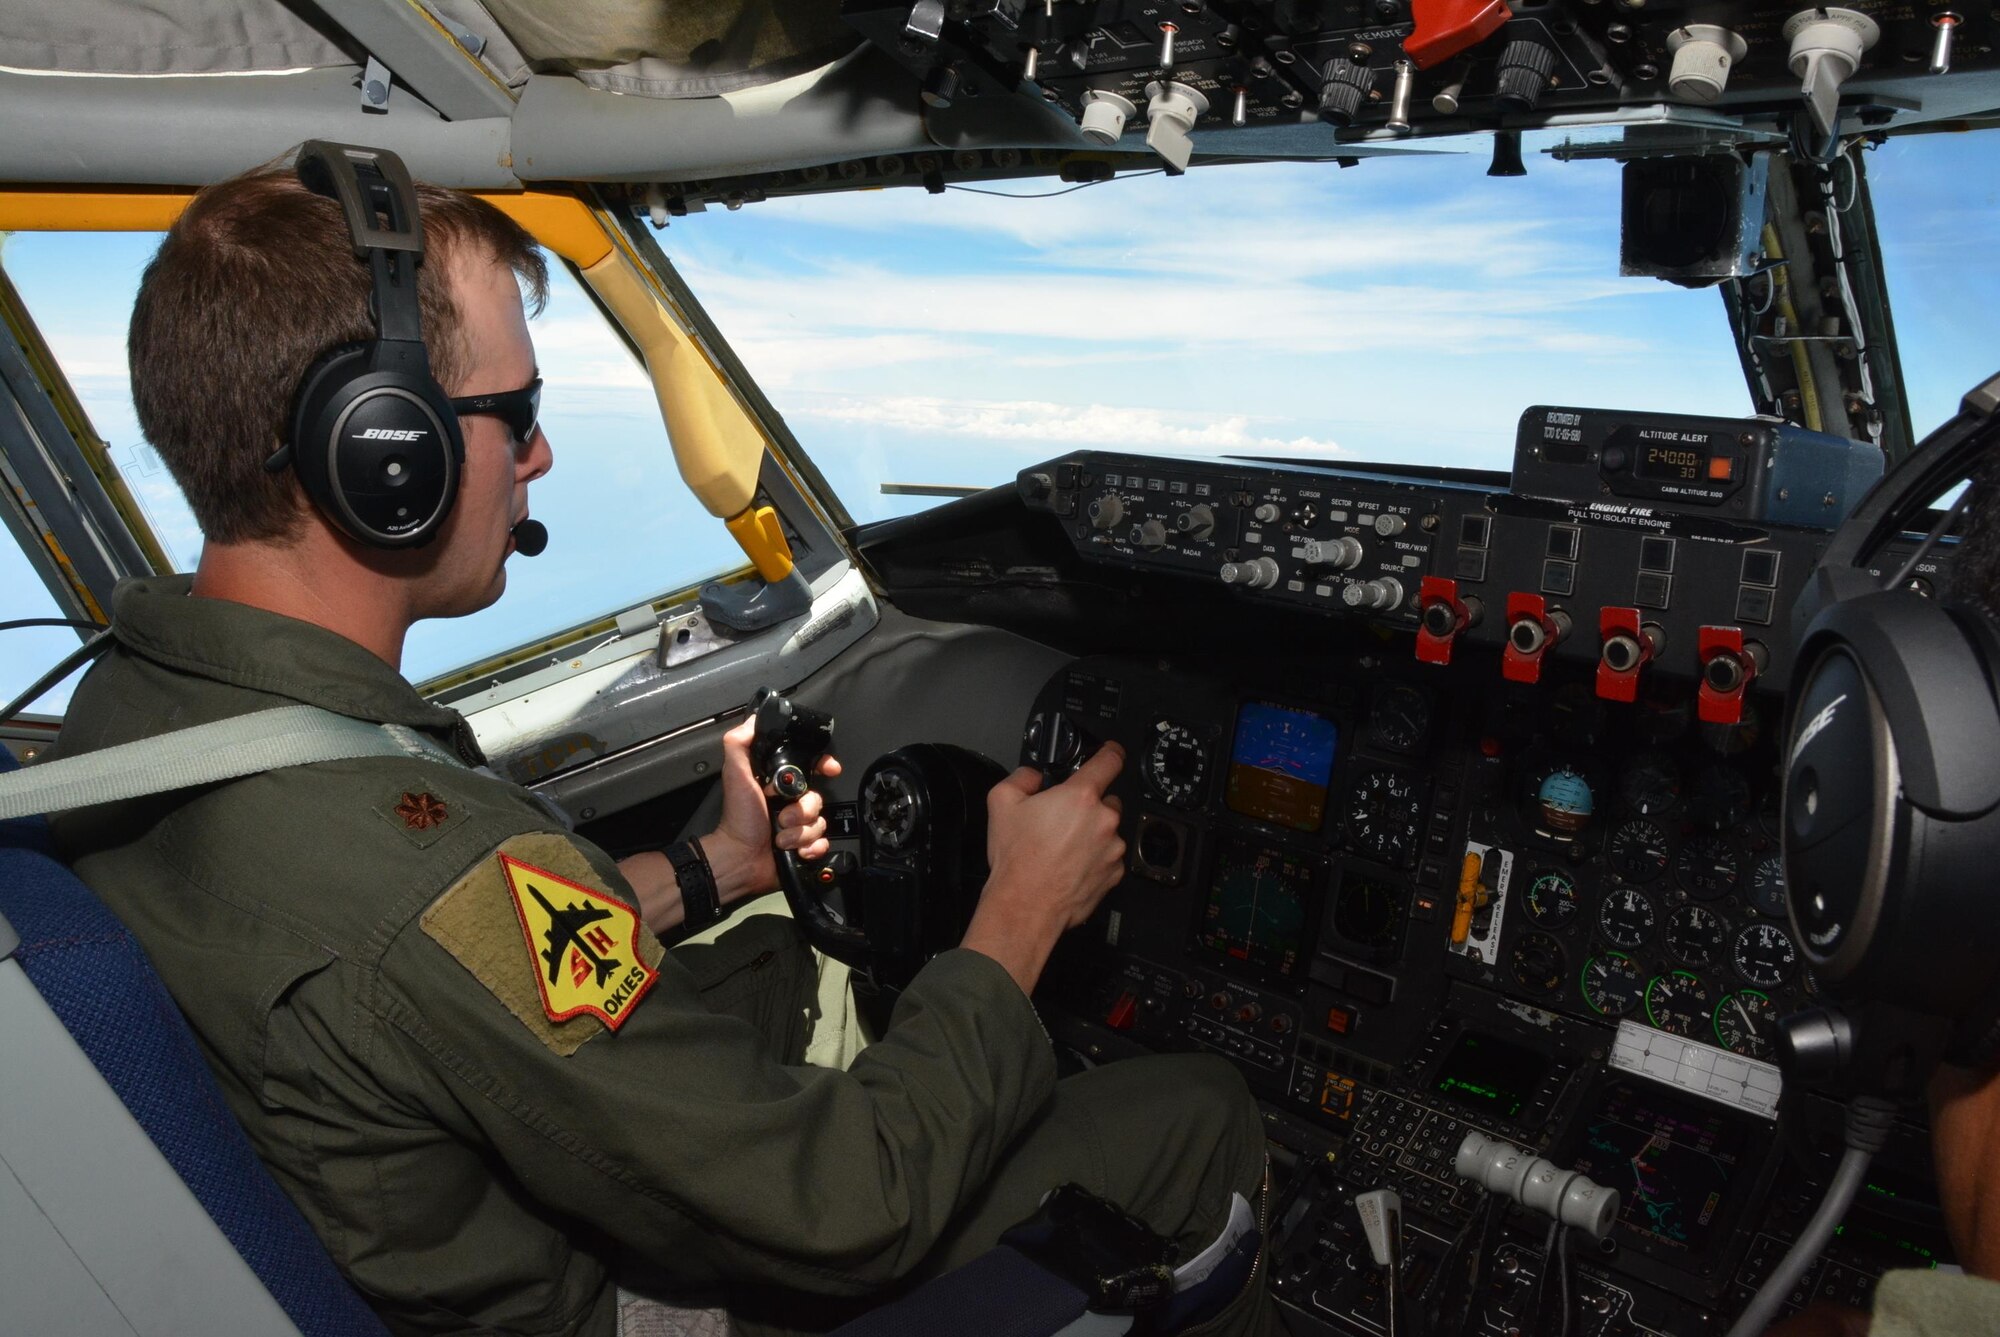 JOINT BASE PEARL HARBOR-HICKAM - U.S. Air Force Maj. Brian Doss, pilot with the 465th Air Refueling Squadron, Tinker Air Force Base, Okla., flies a KC-135R Stratotanker refueling mission over the Pacific Ocean as part of Rim of the Pacific 2016. During the flight, the team from Tinker offloaded 49,700 lbs. of fuel to six U.S. Navy F-18 Hornets and two Canadian CF-18 Hornets. (U.S. Air Force photo\Tech. Sgt. Lauren Gleason)